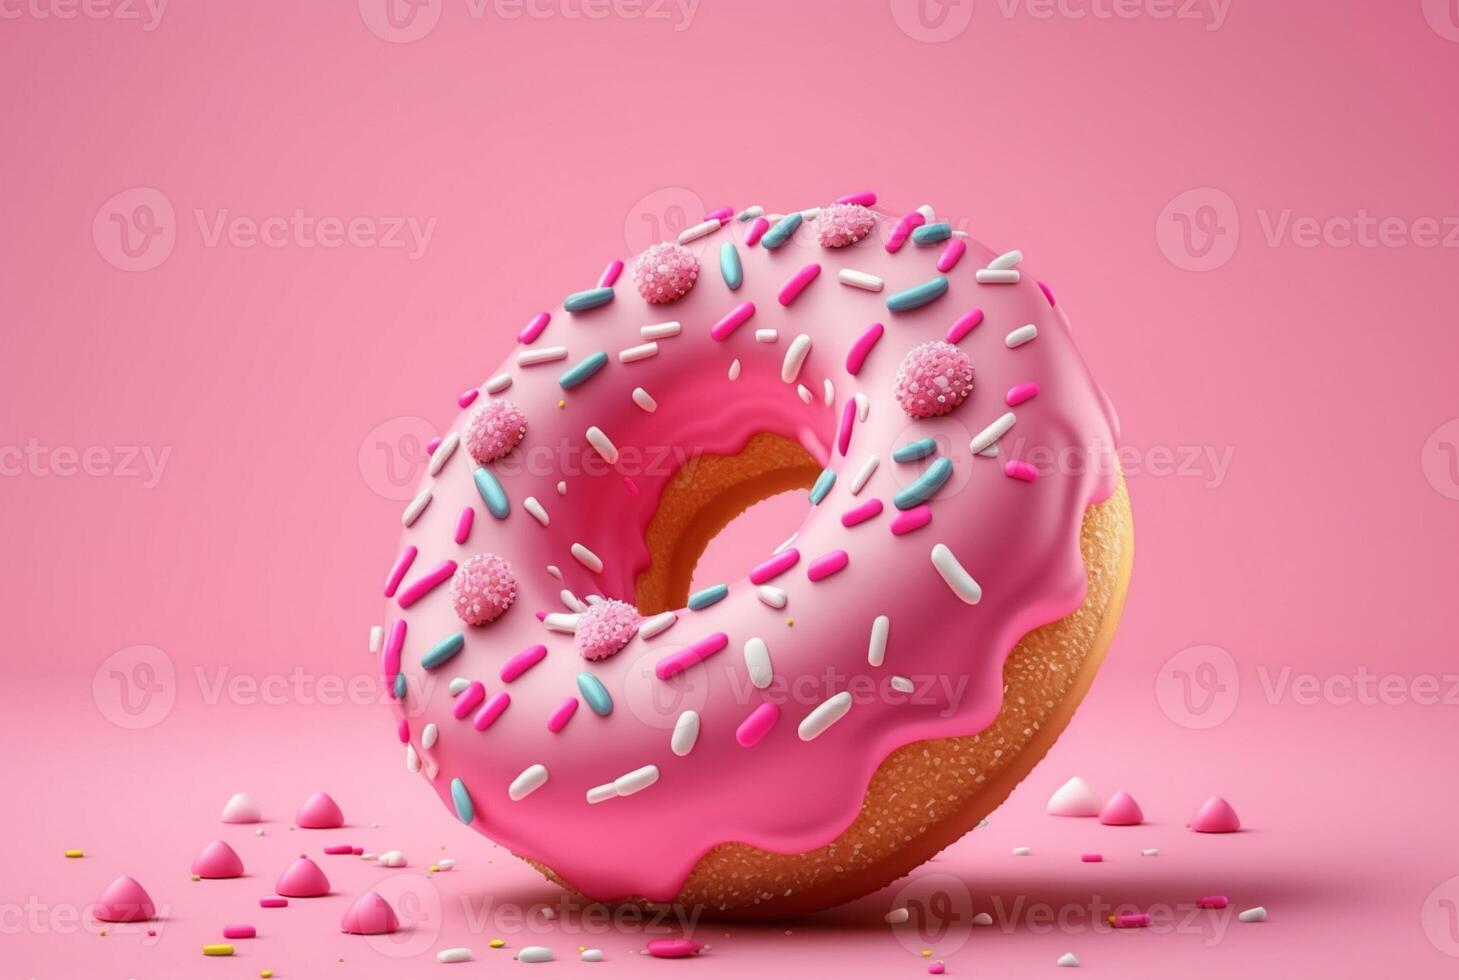 Donuts with pink icing and colorful sprinkles of sugar. On a pink background. photo